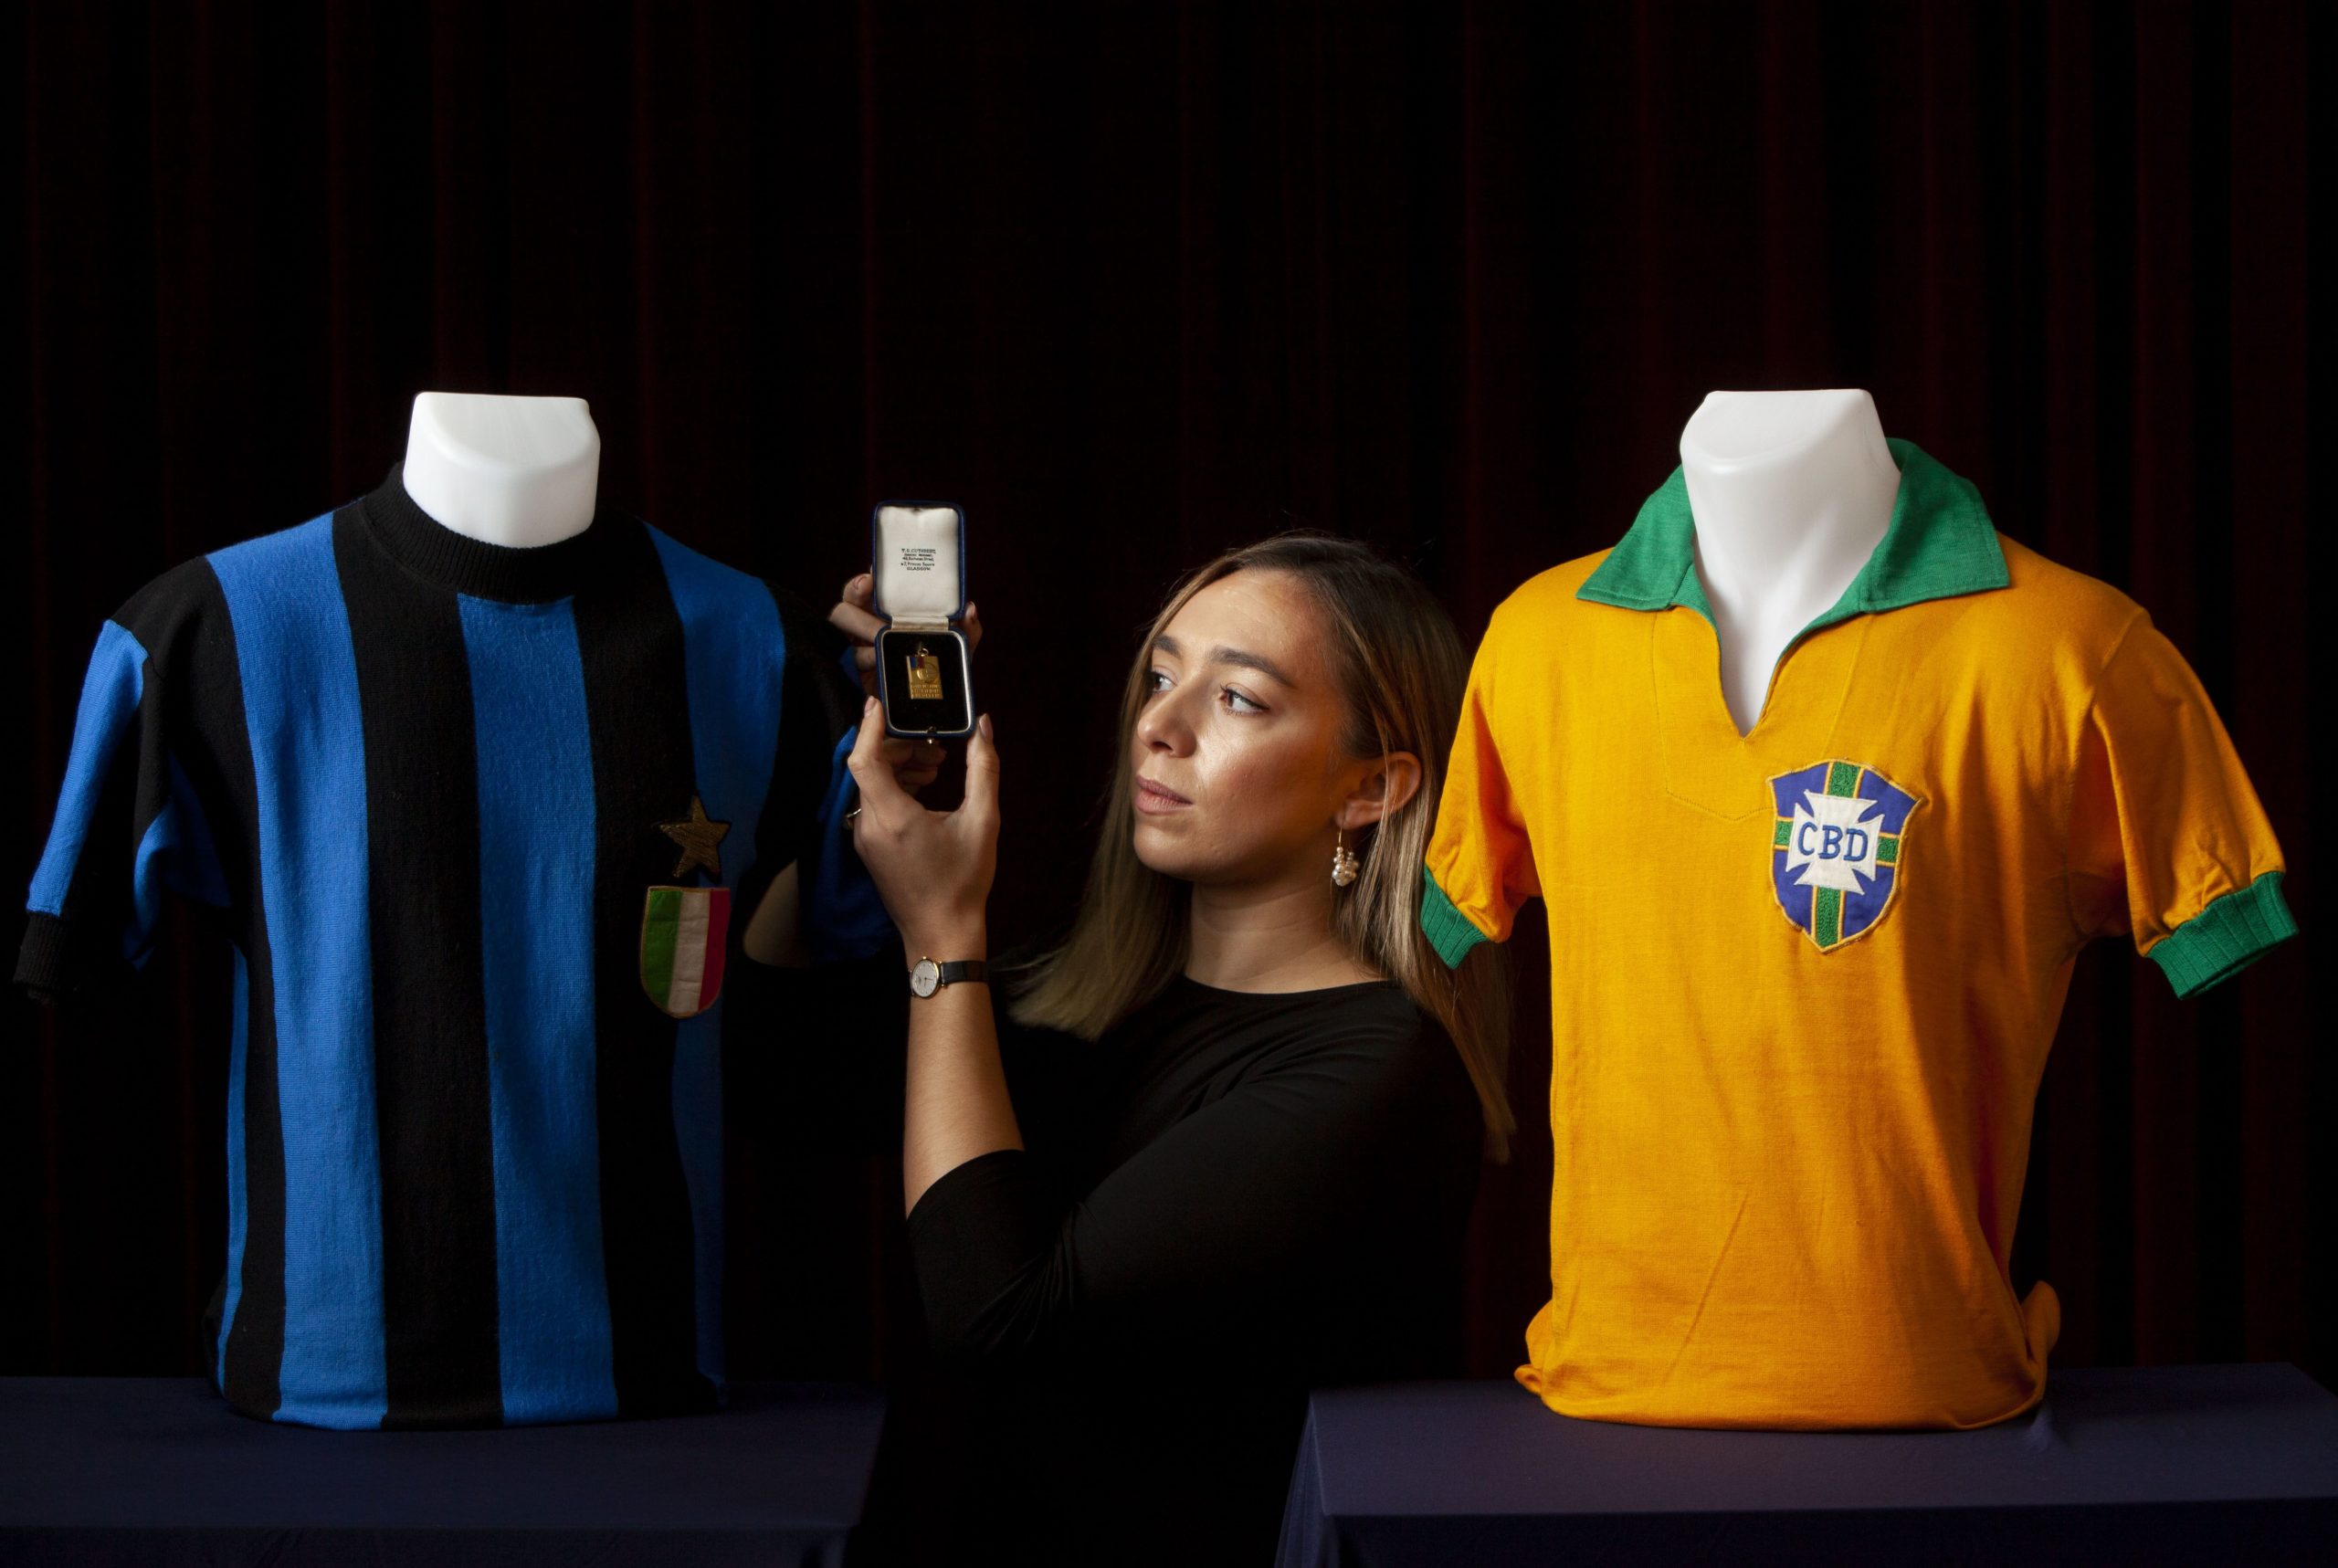 Memorabilia: Pele's shirt is also up for auction.